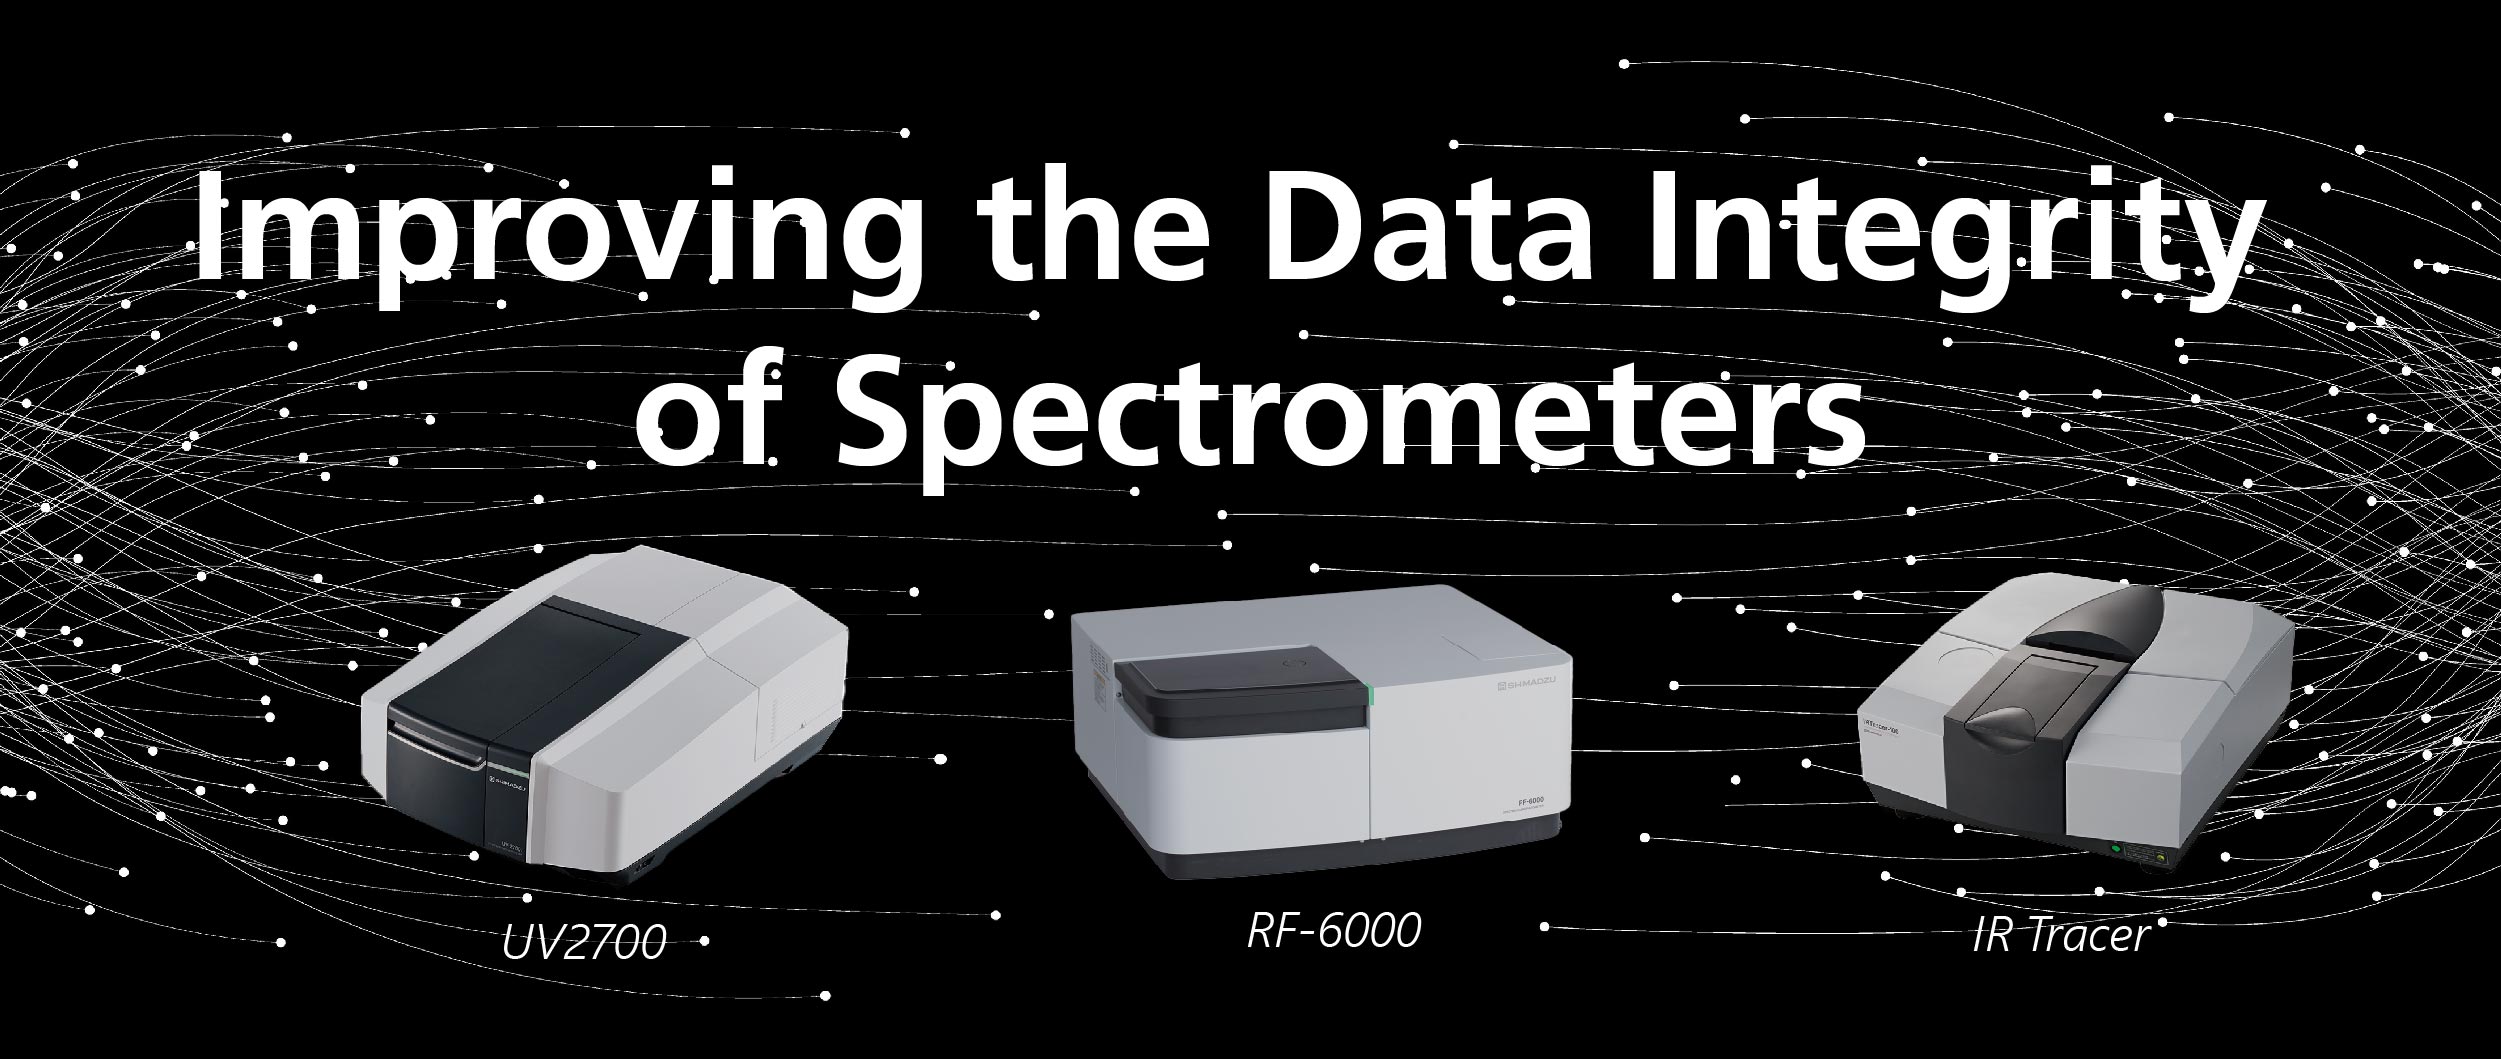 Improving the Data Integrity of Spectrometers